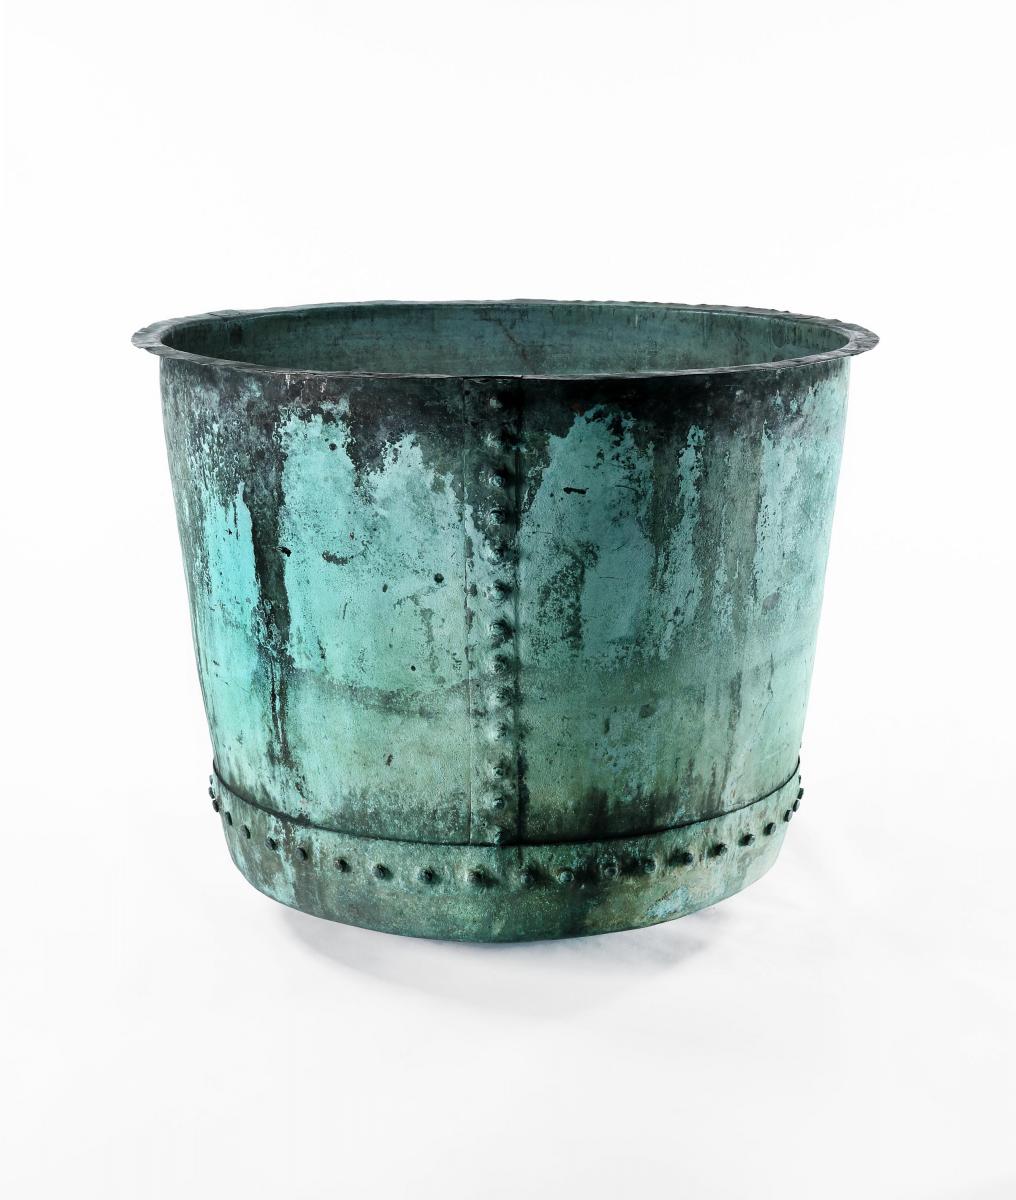 Large Rivetted Copper Planter